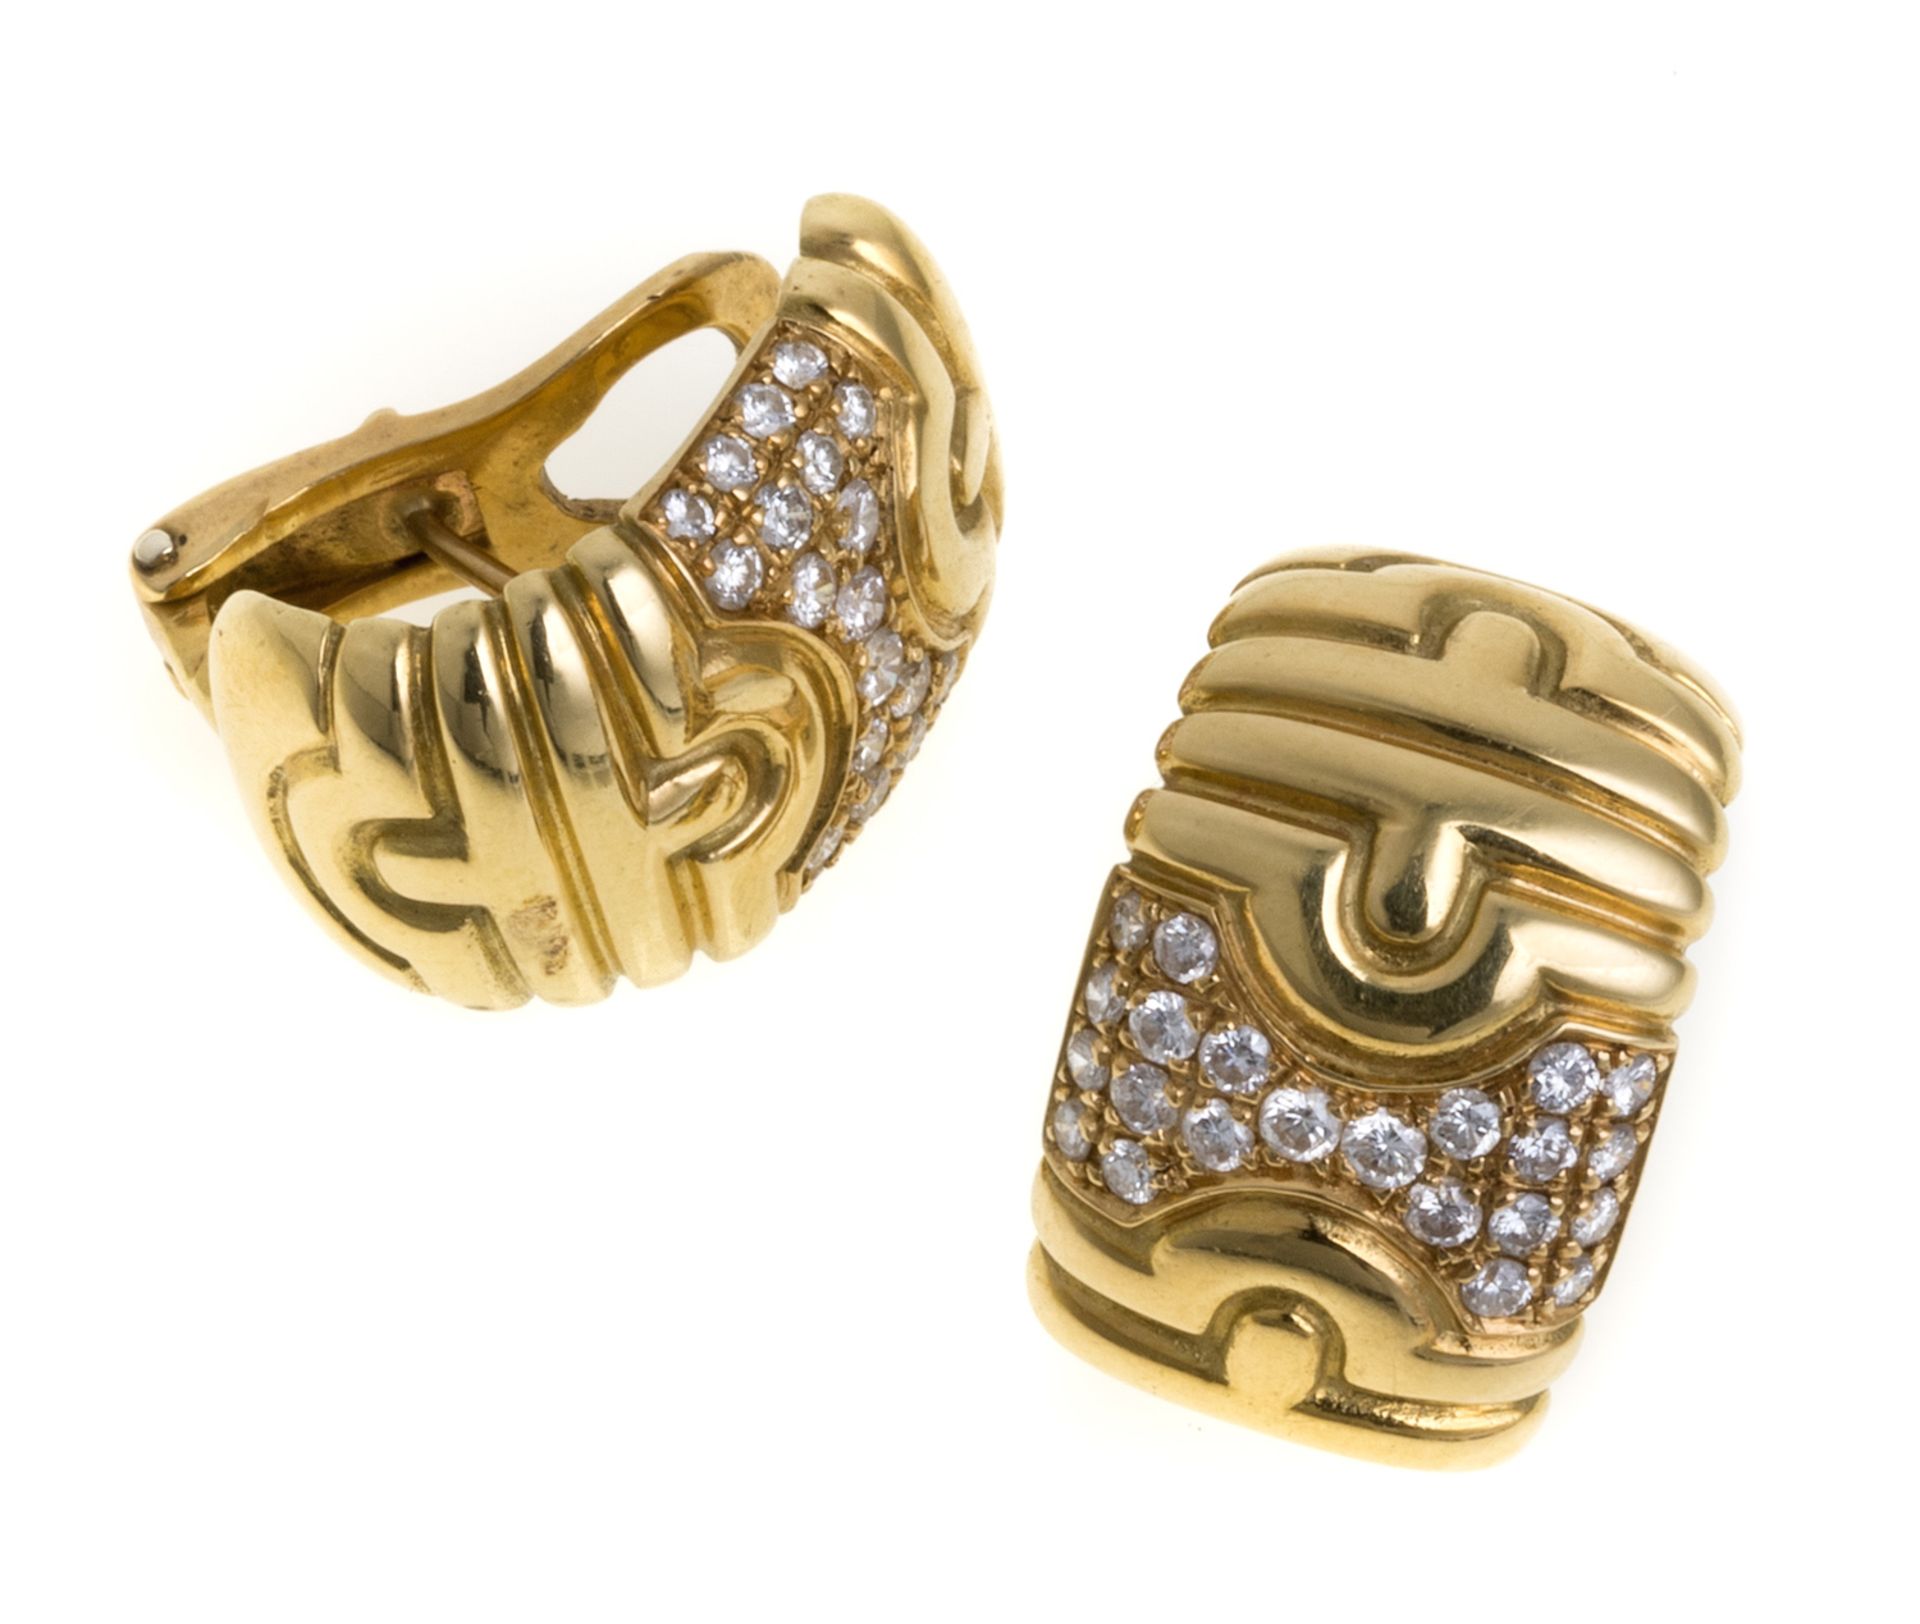 GOLD EARRINGS WITH DIAMOND PAVE